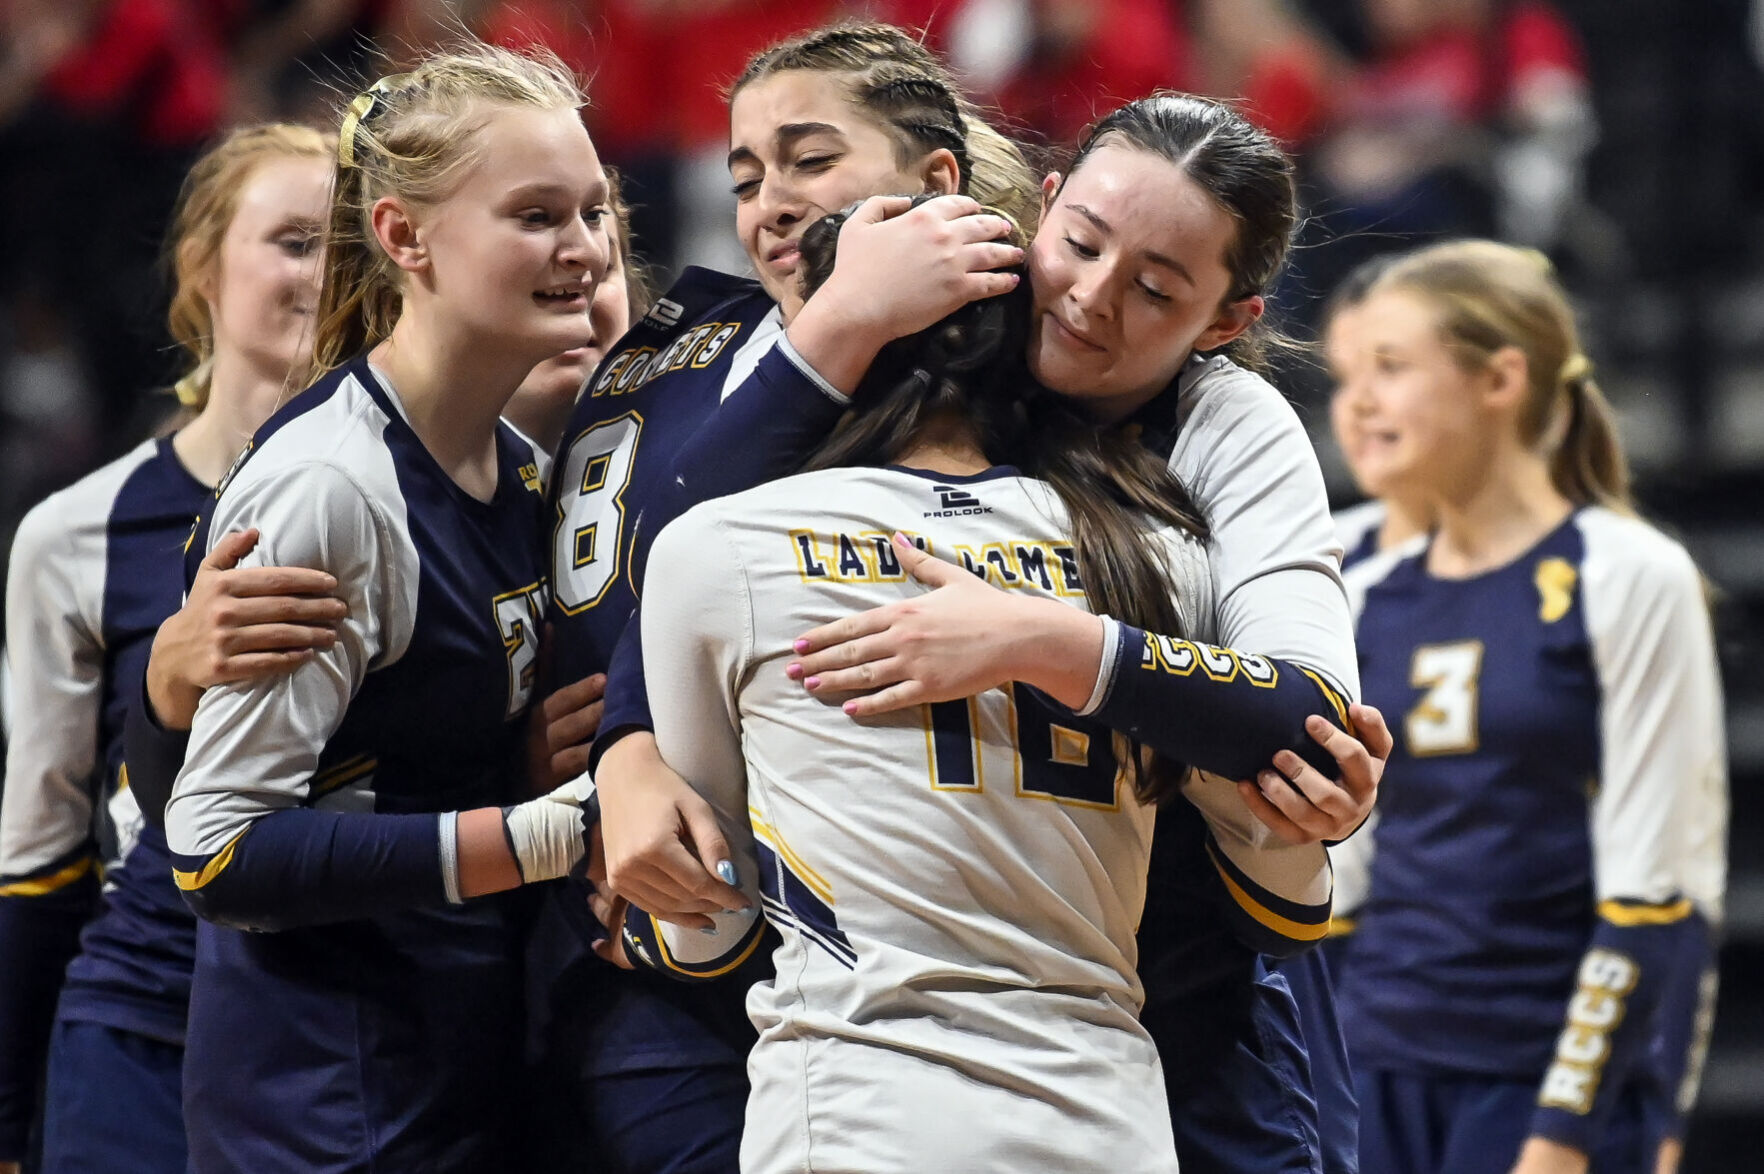 Lady Comets end historic season as Class A runner-up